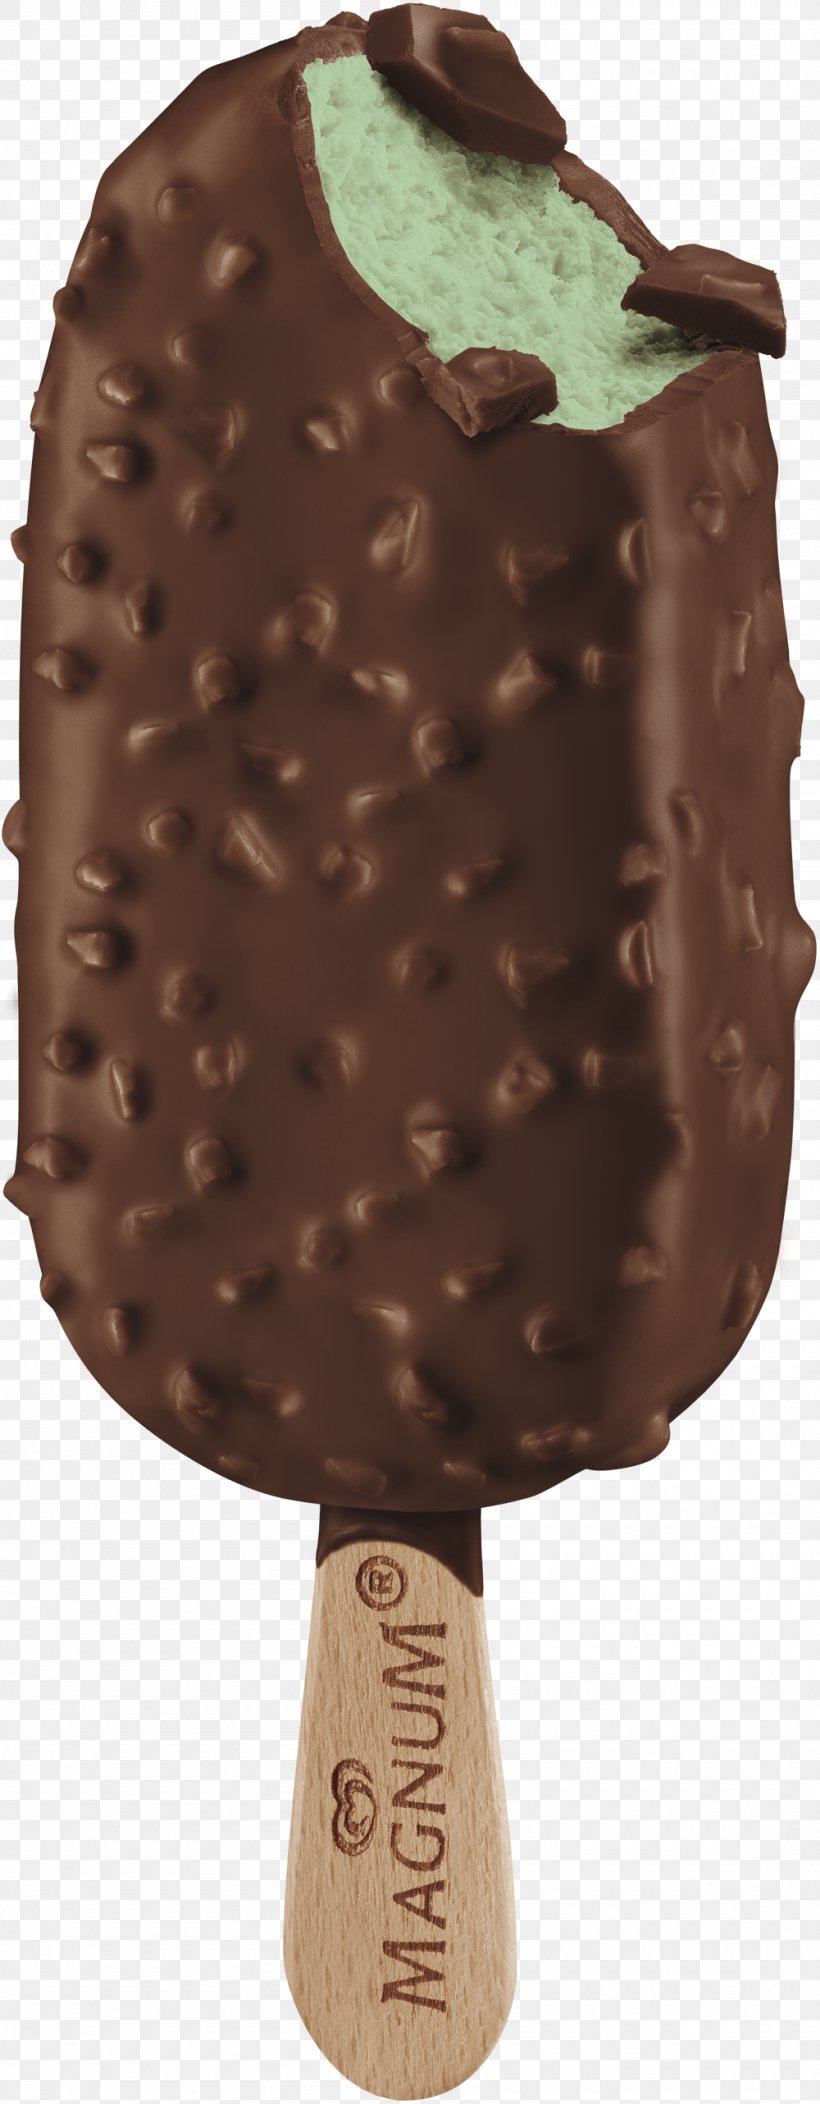 Chocolate Ice Cream Death By Chocolate Fudge Praline, PNG, 1000x2566px, Ice Cream, Caramel, Chocolate, Chocolate Brownie, Chocolate Chip Download Free